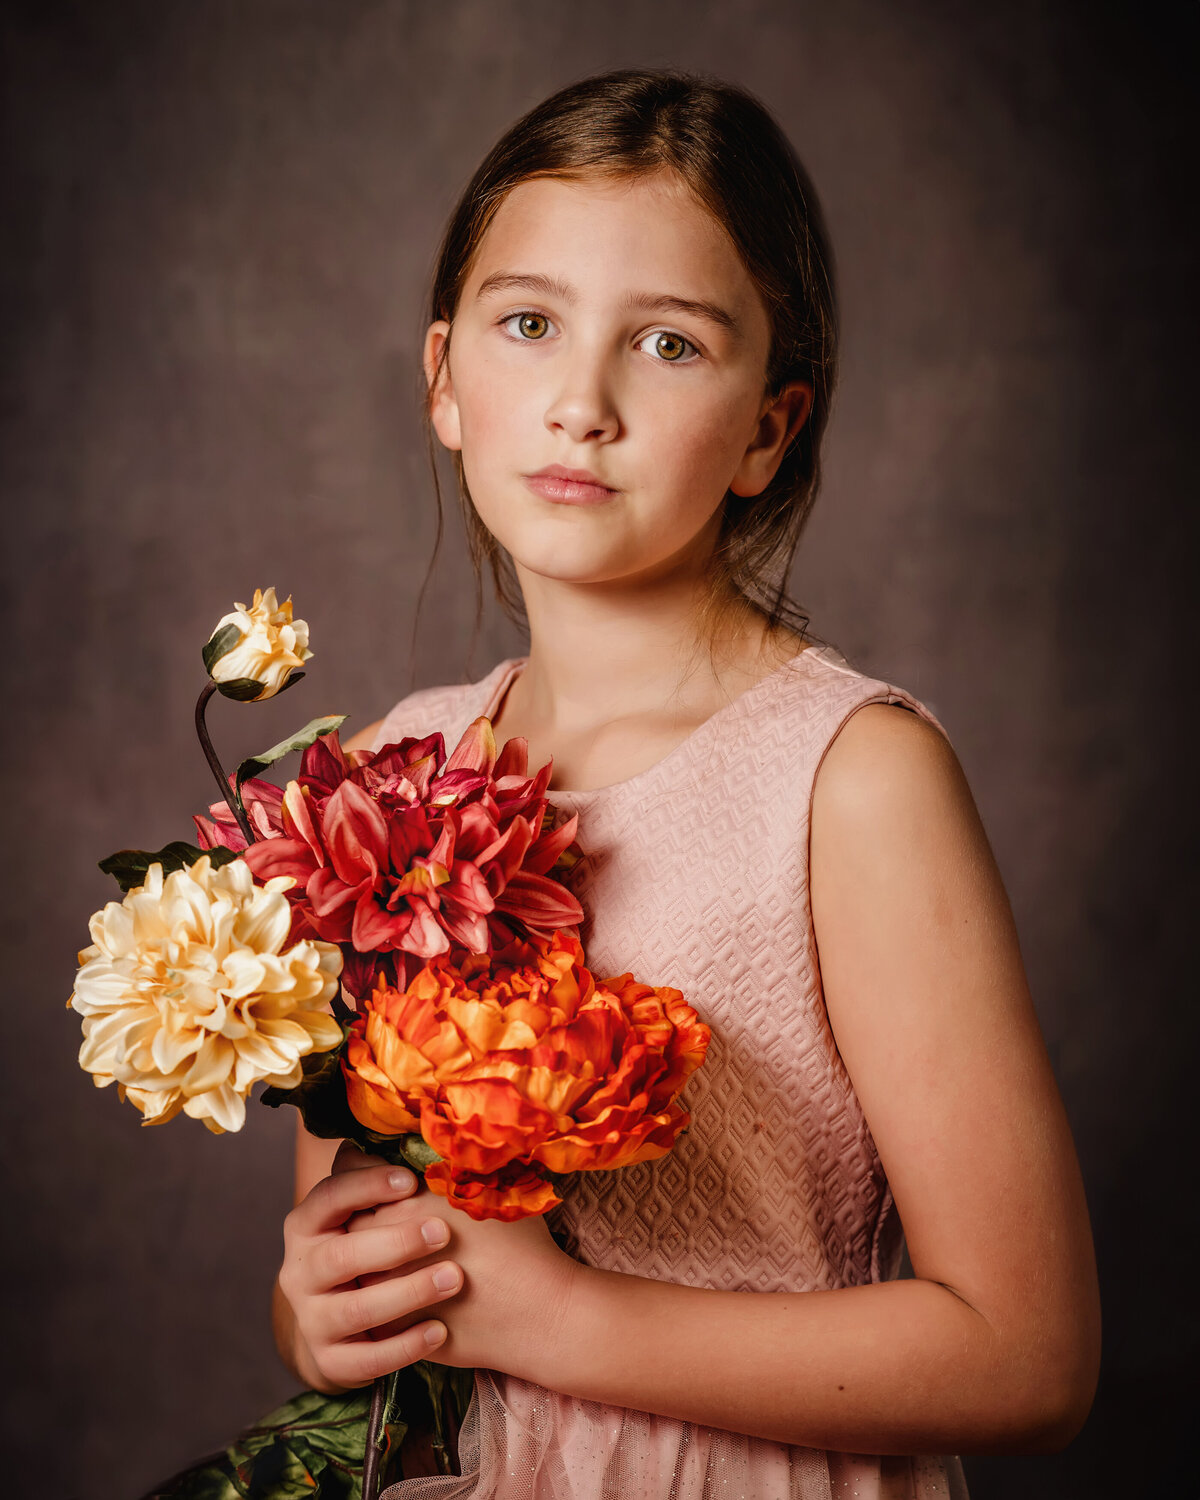 Portrait-of-a-young-girl-with-flowers